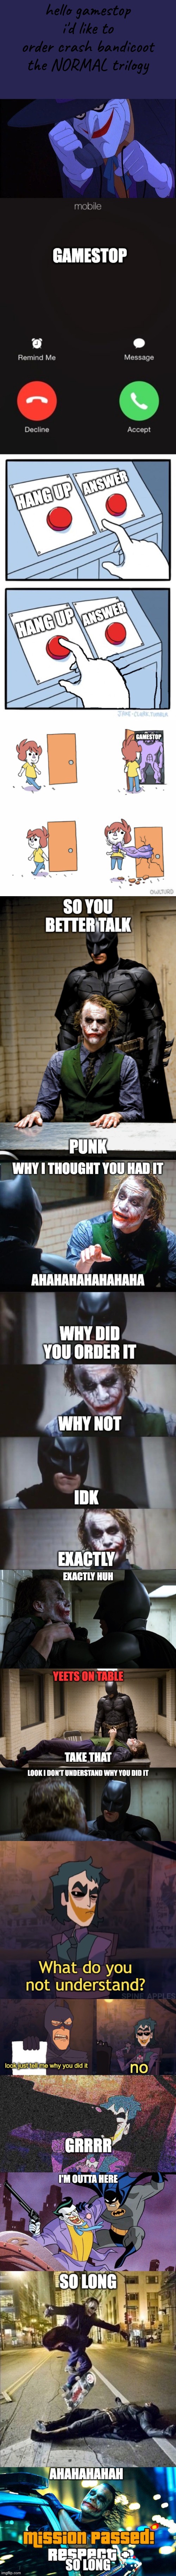 image tagged in repost,i first posted this in my own stream,joker,memes | made w/ Imgflip meme maker